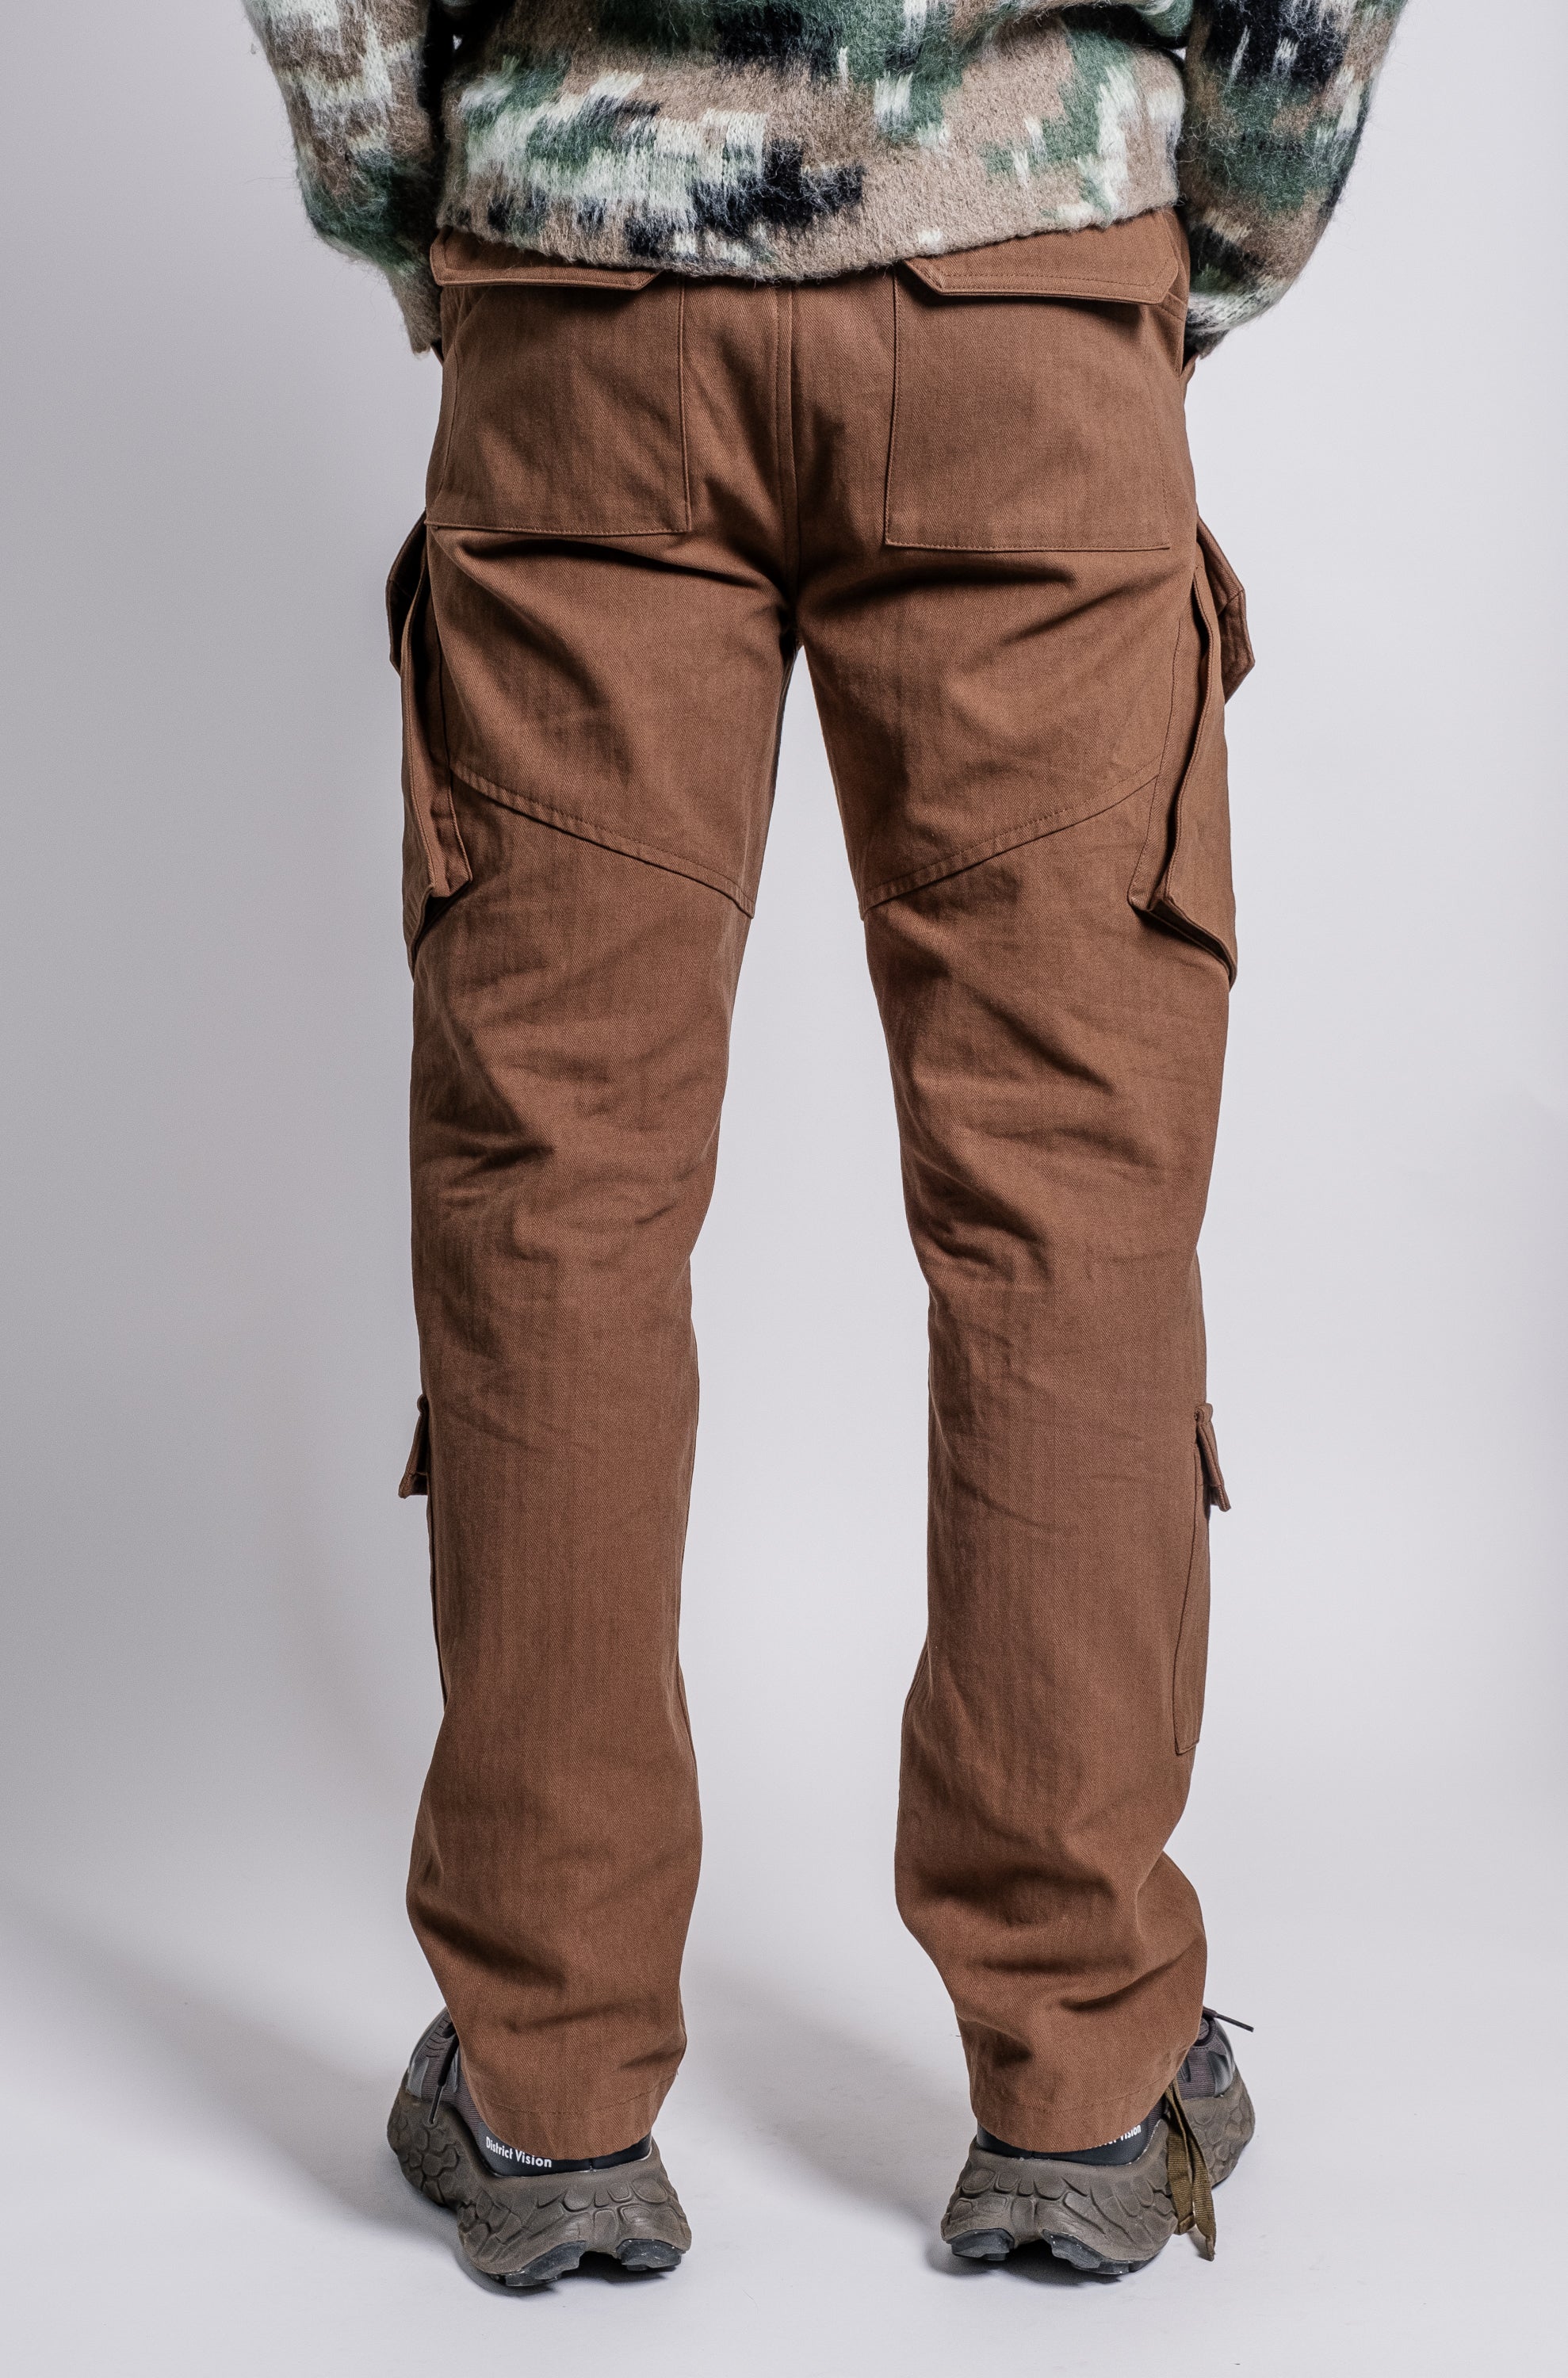 COFFEE BROWN COTTON SOLID CARGO PANT – ROOKIES